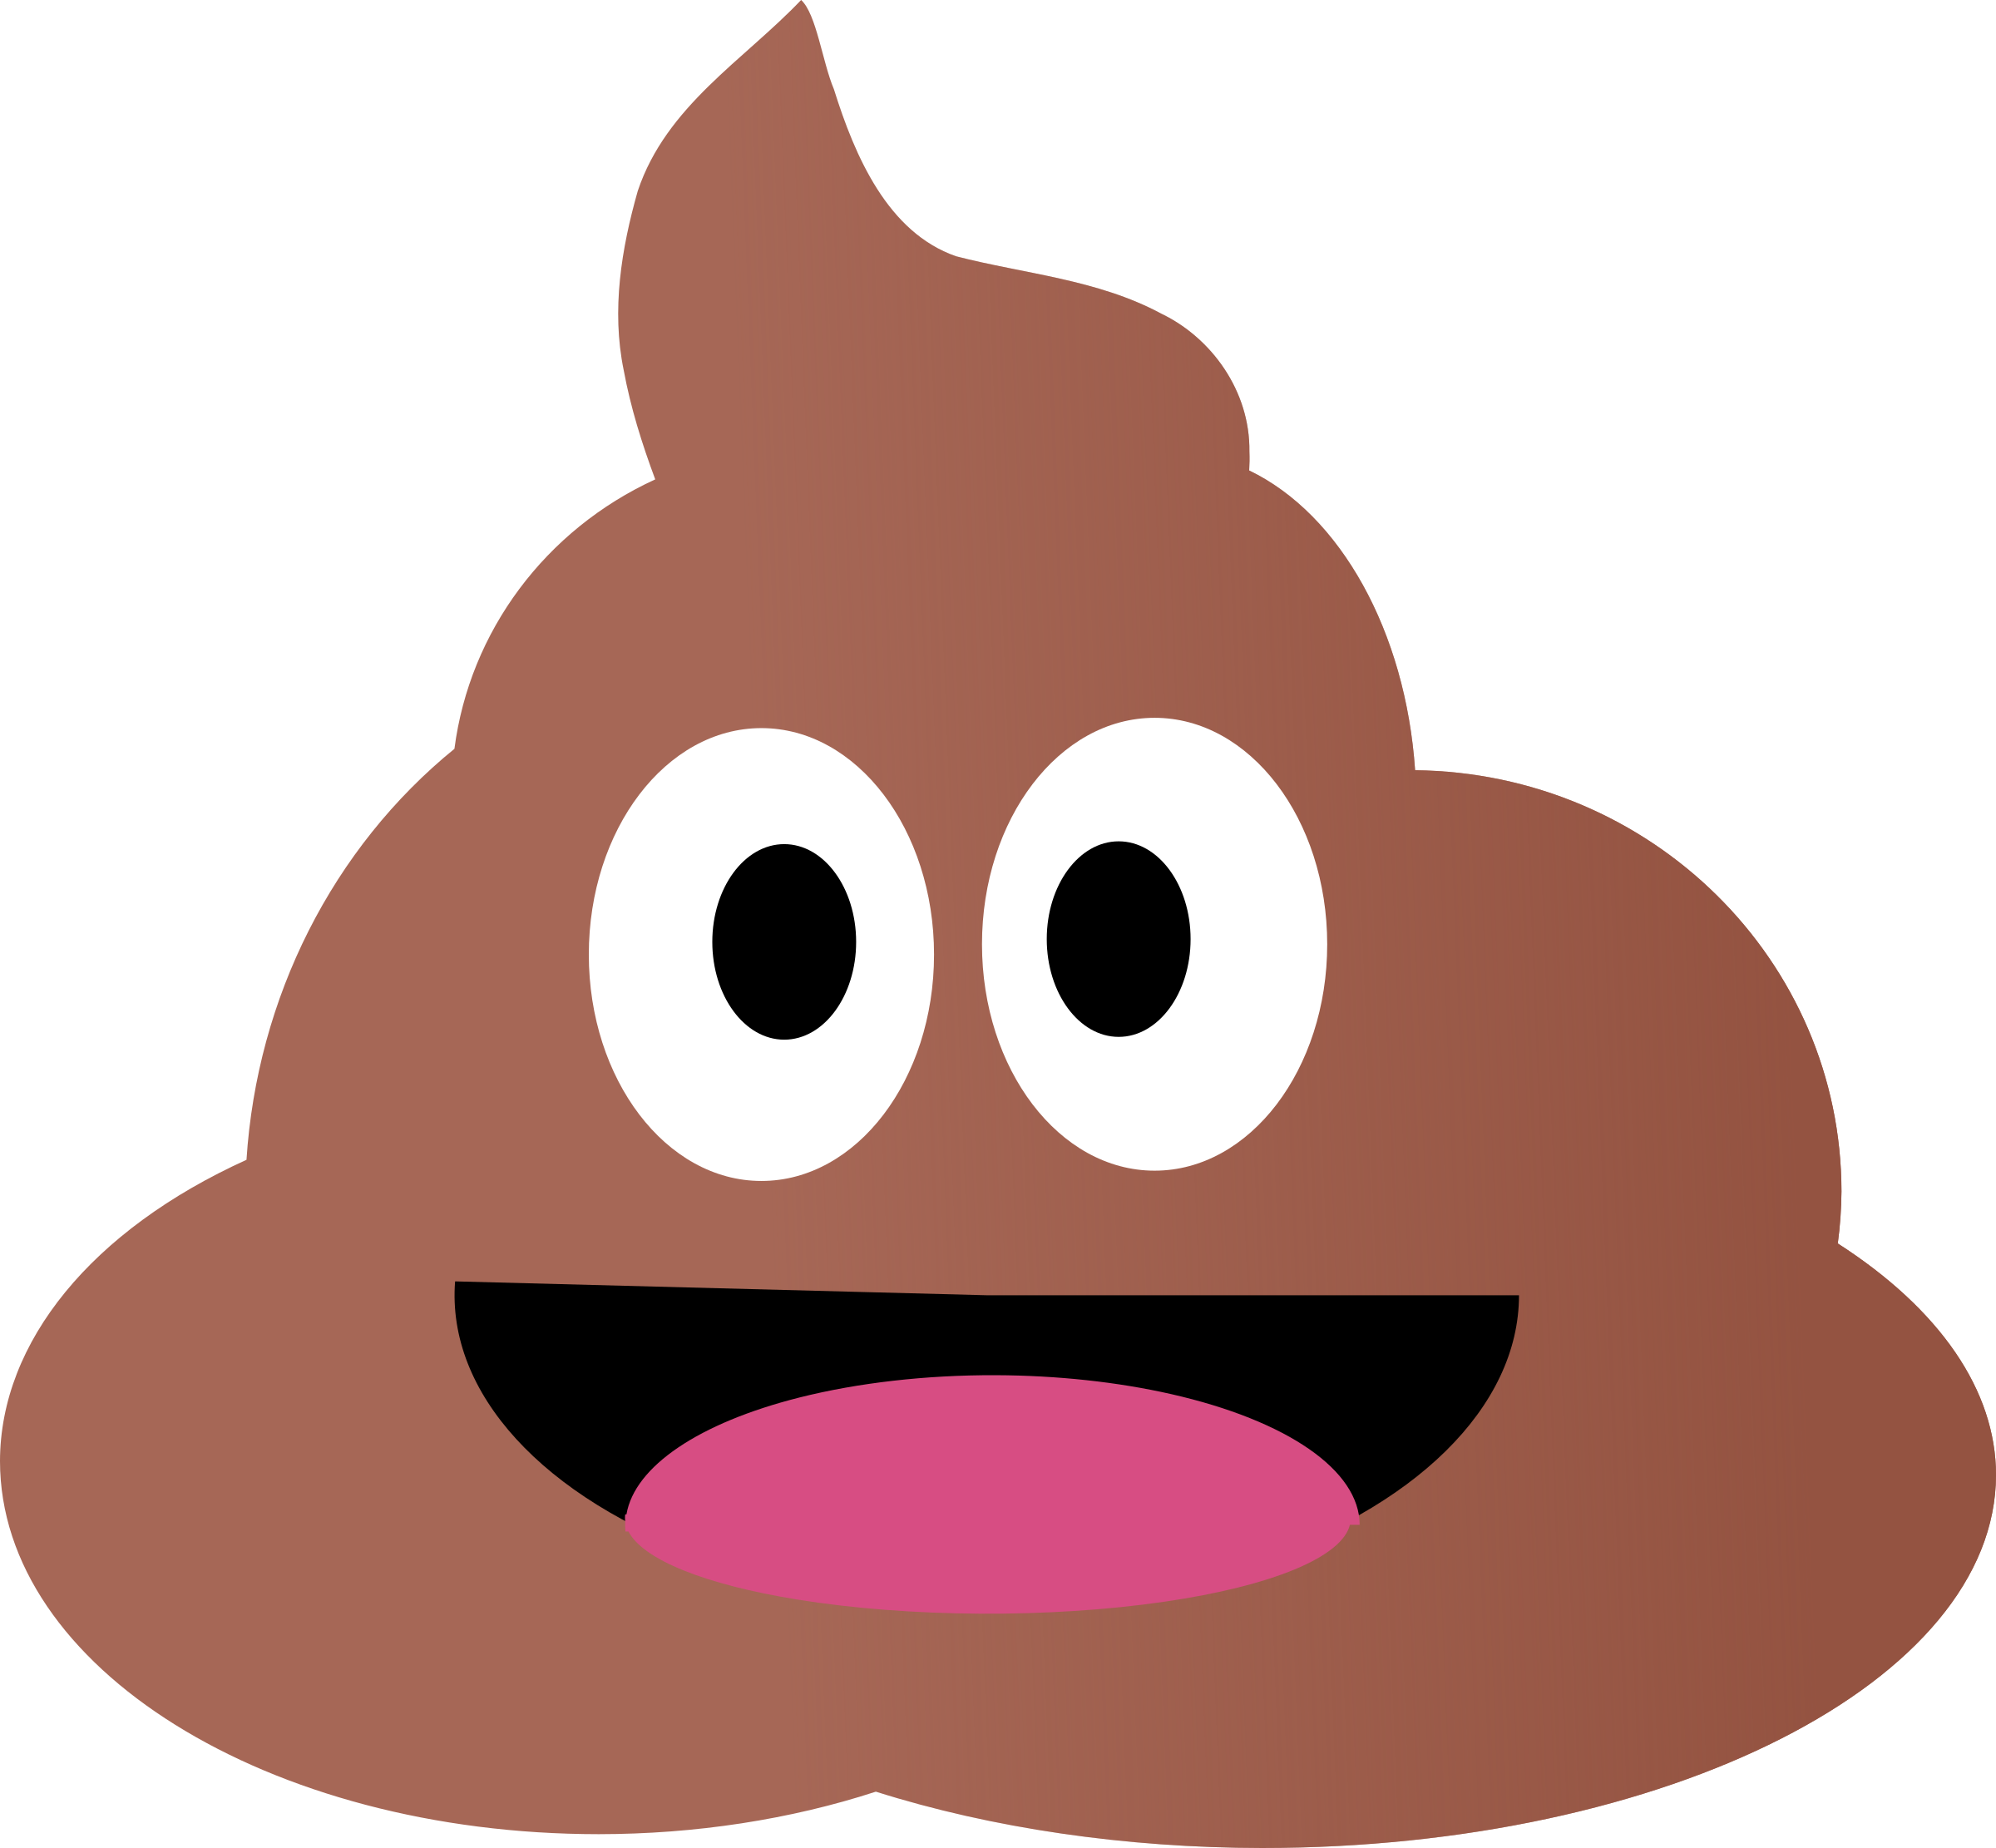 Nut clipart pile. Of poo emoji icons